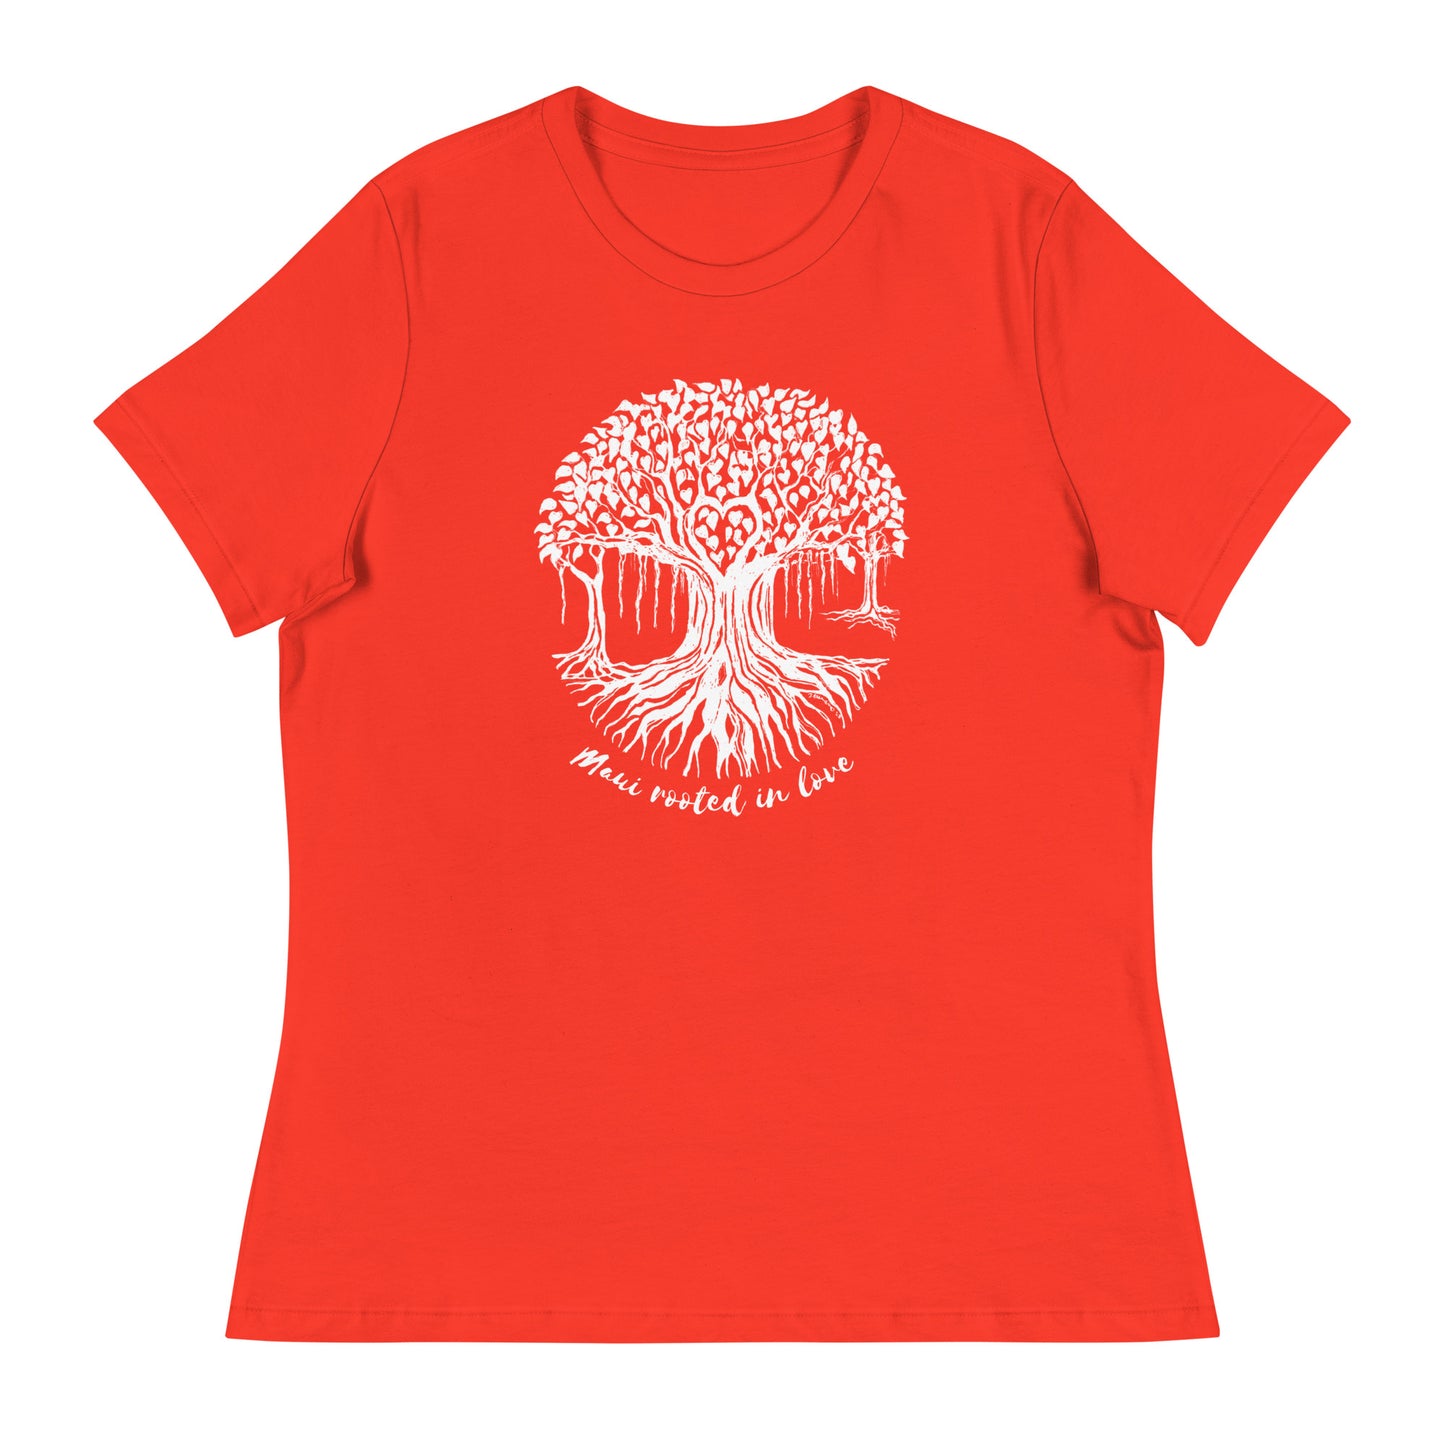 Women's Relaxed T-Shirt with Maui Banyan Tree